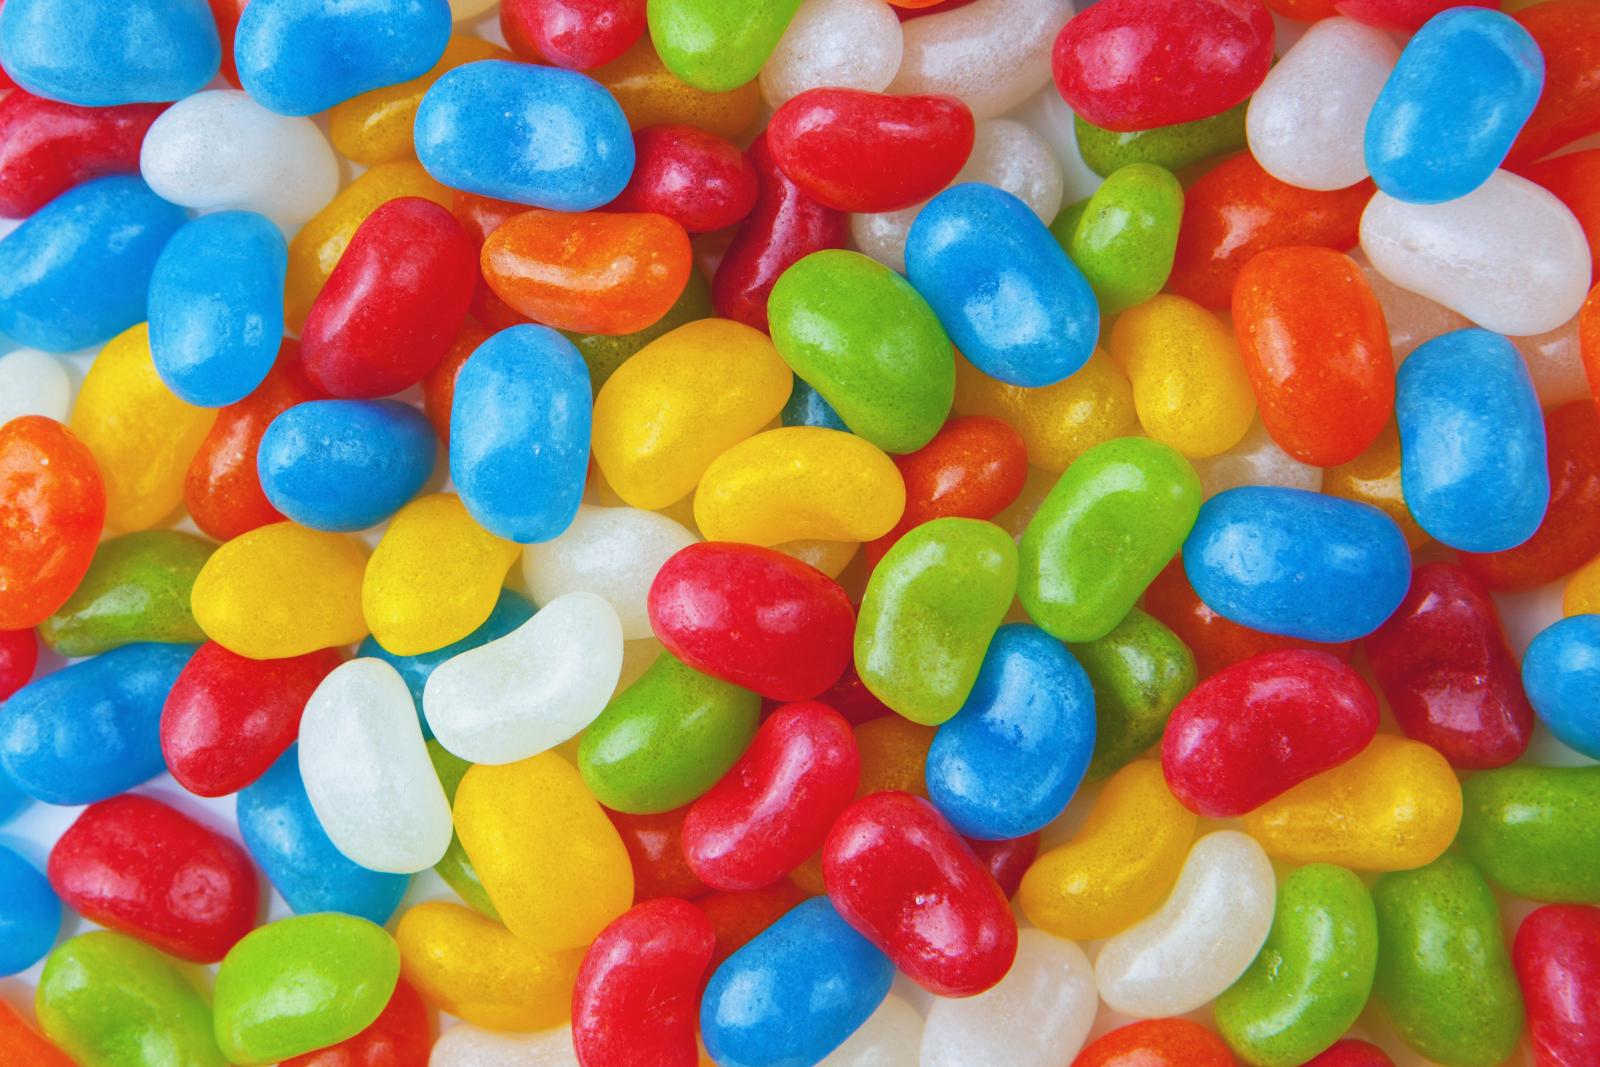 Coloured jelly beans. Photo credit: Pexels